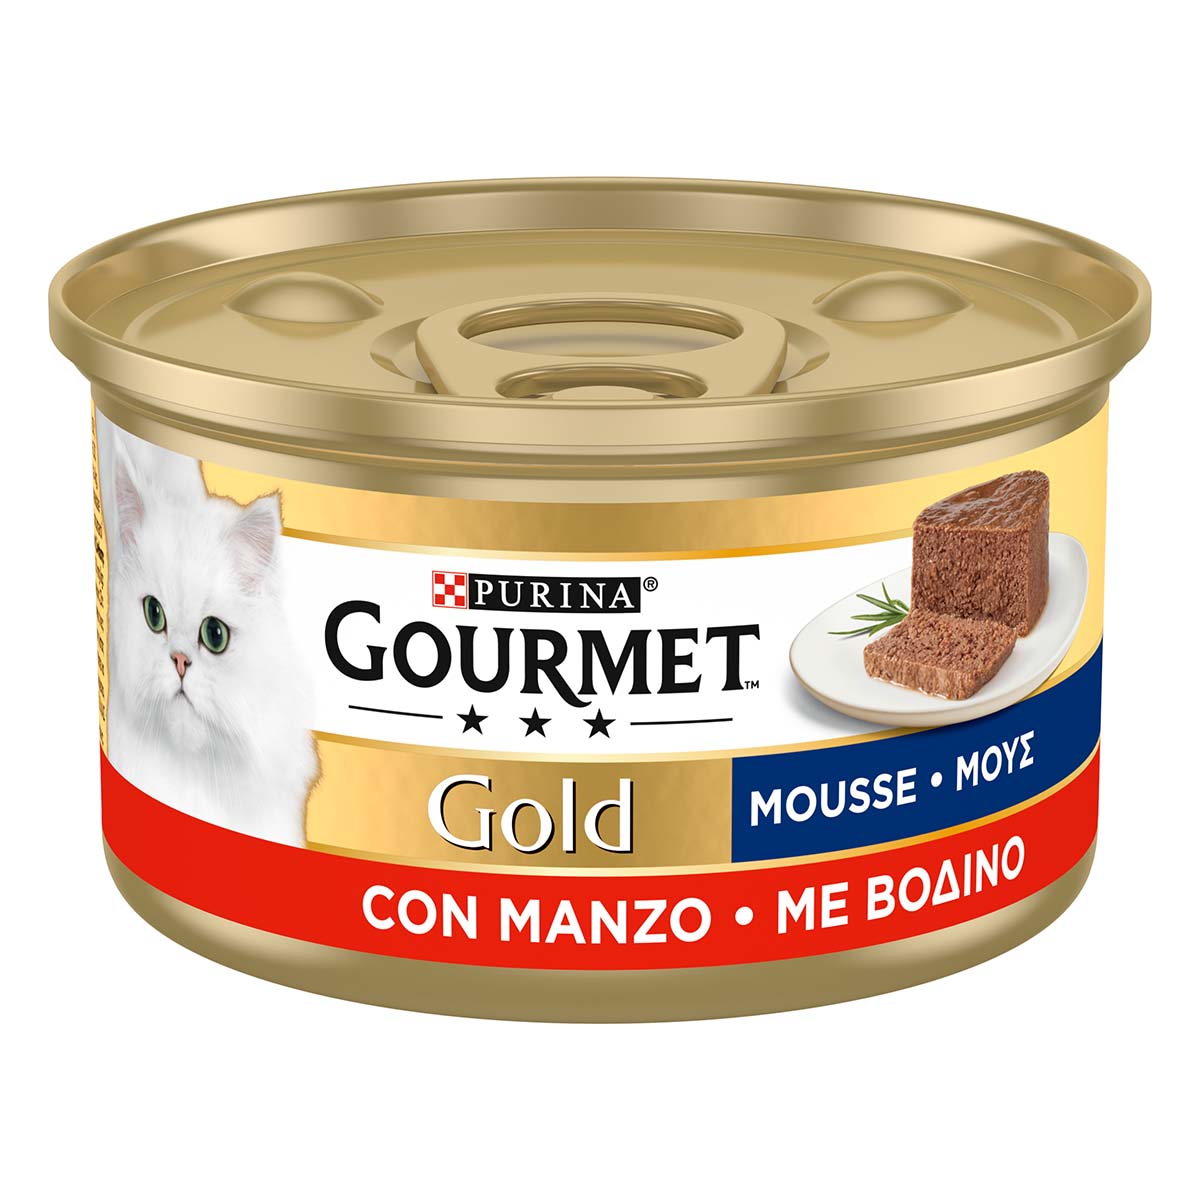 GOURMET GOLD Mousse con Manzo